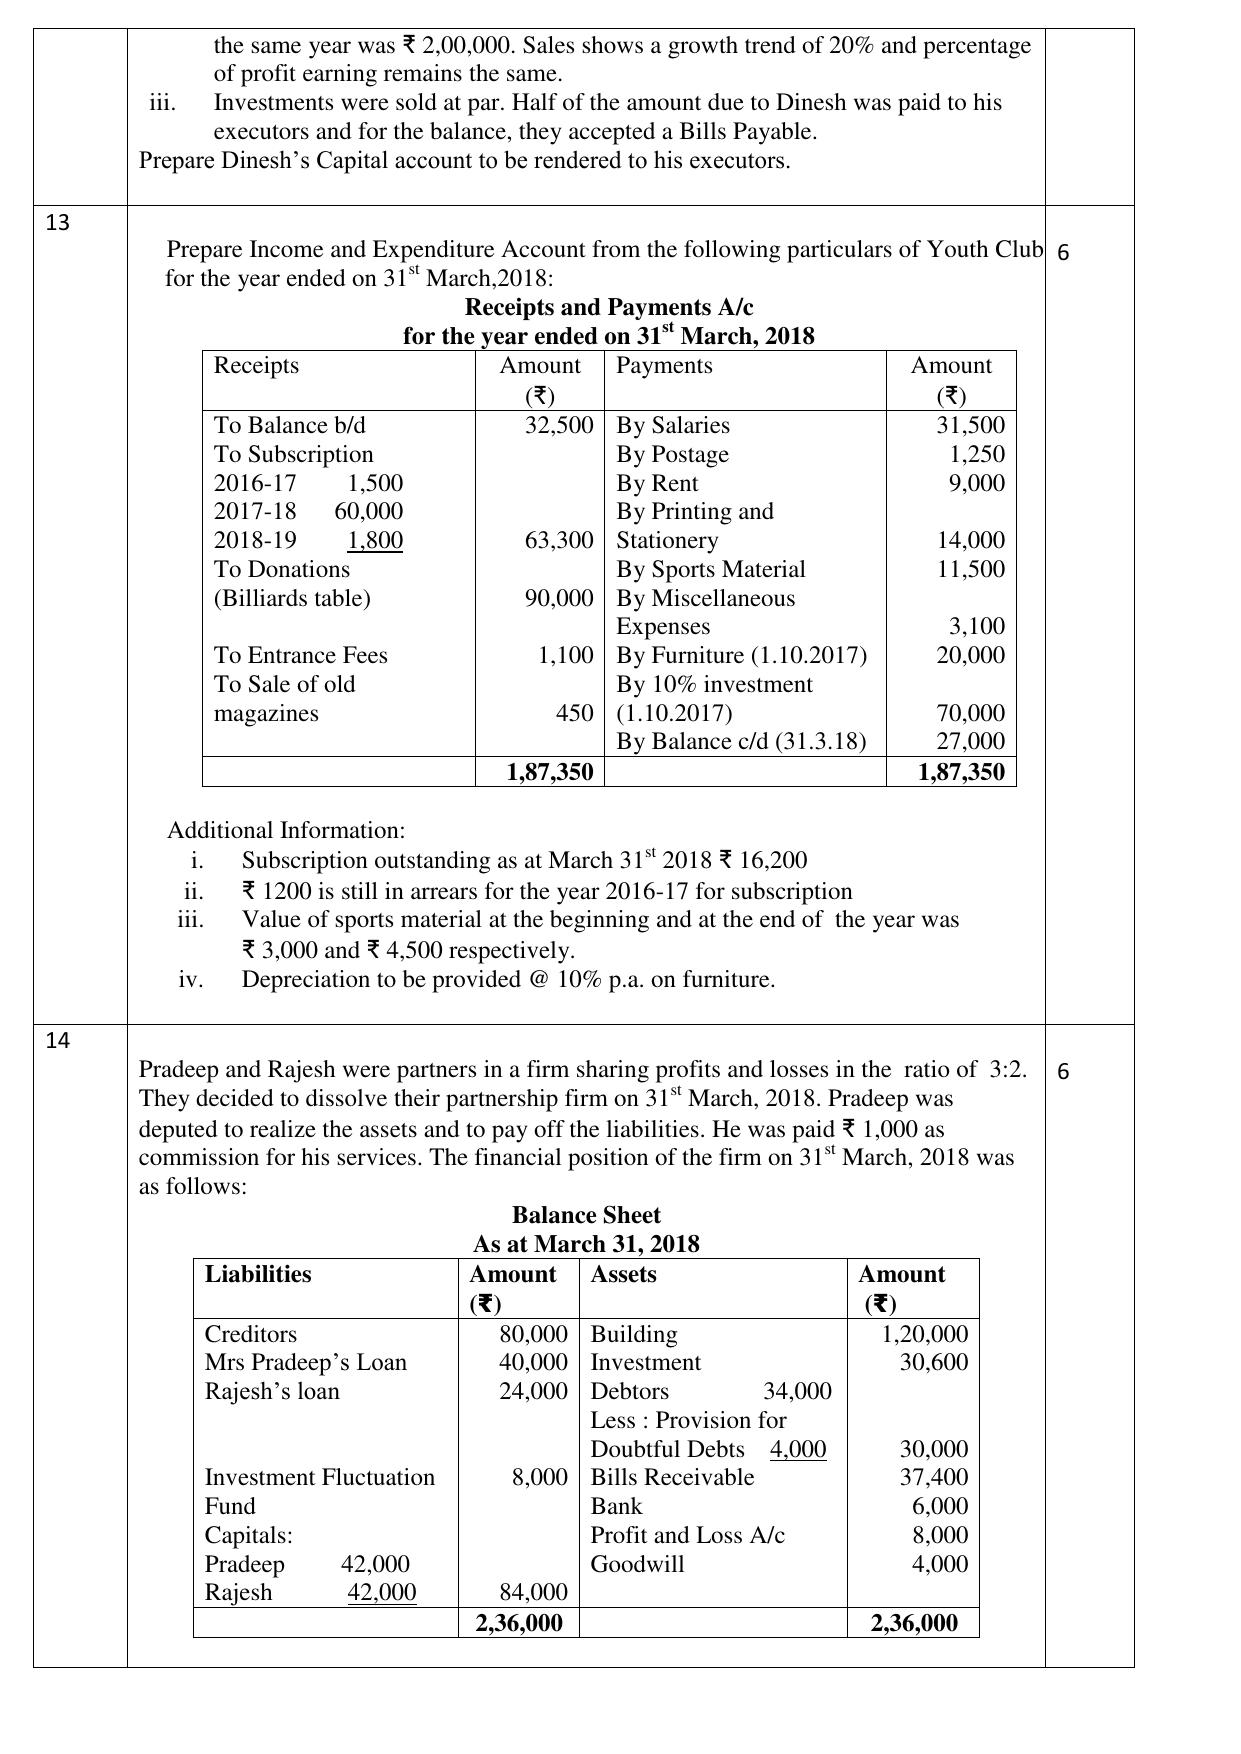 CBSE Class 12 Accountancy-Sample Paper 2018-19 - Page 4